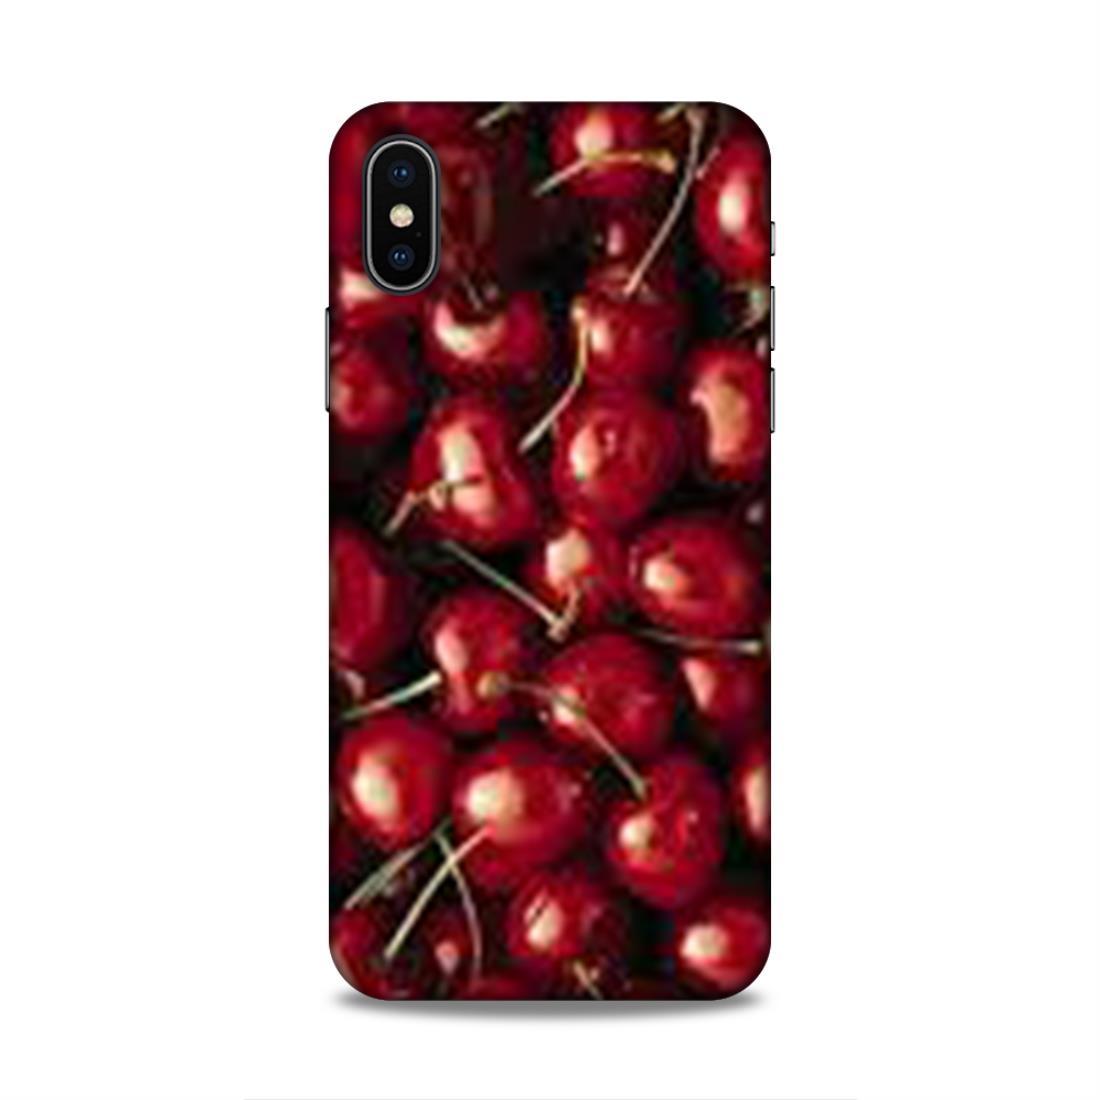 Red Cherry Love iPhone XS Mobile Cover Case